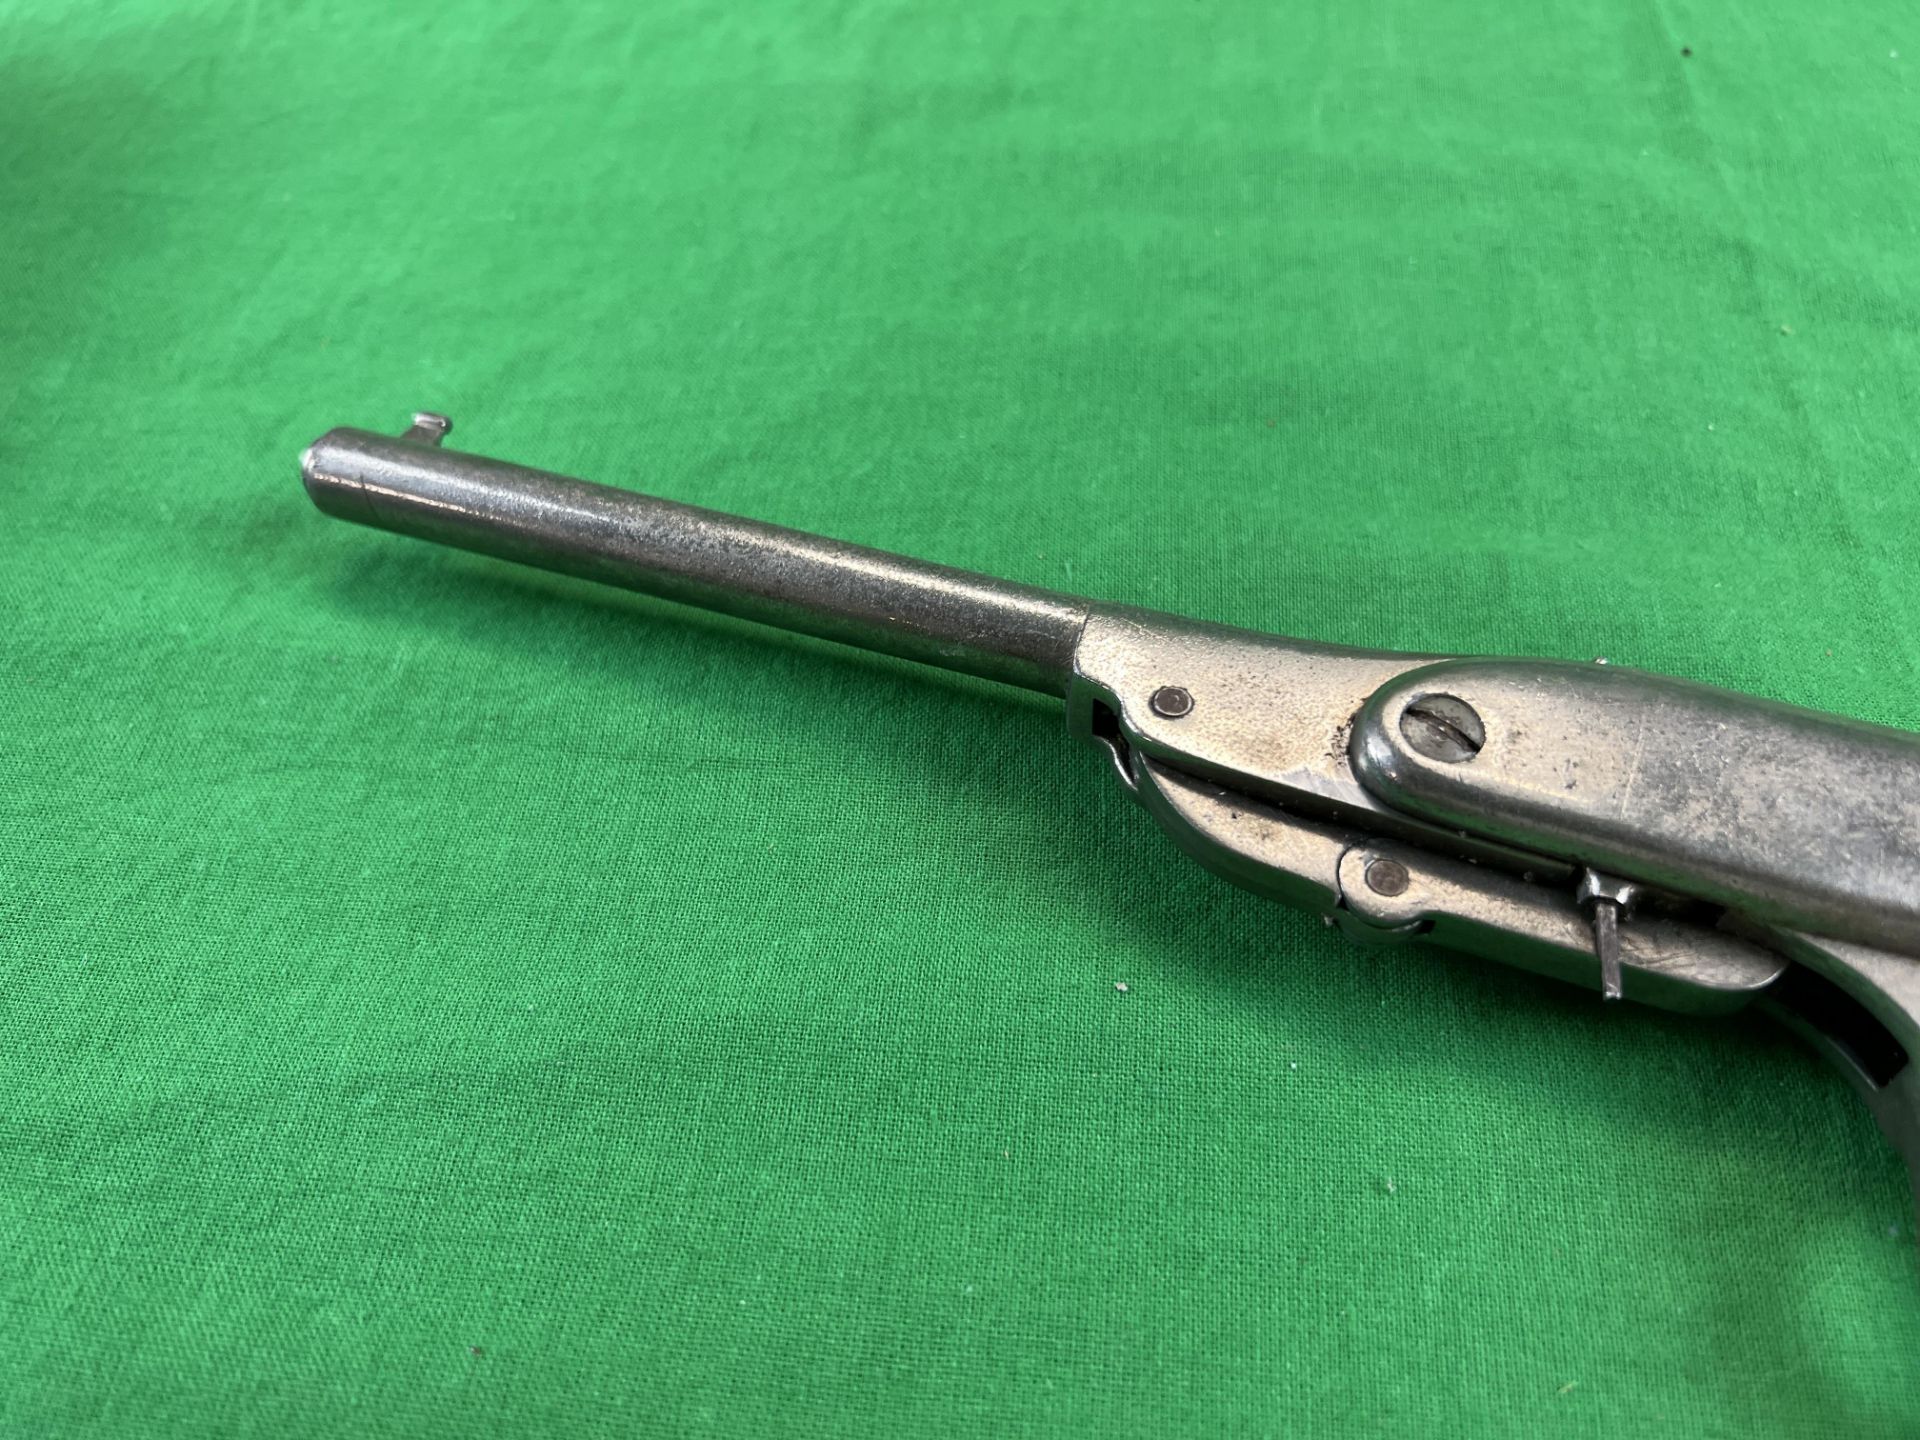 OKLAHOMA MONDIAL VINTAGE ITALIAN AIR PISTOL - NO POSTAGE OR PACKING AVAILABLE - Image 9 of 9